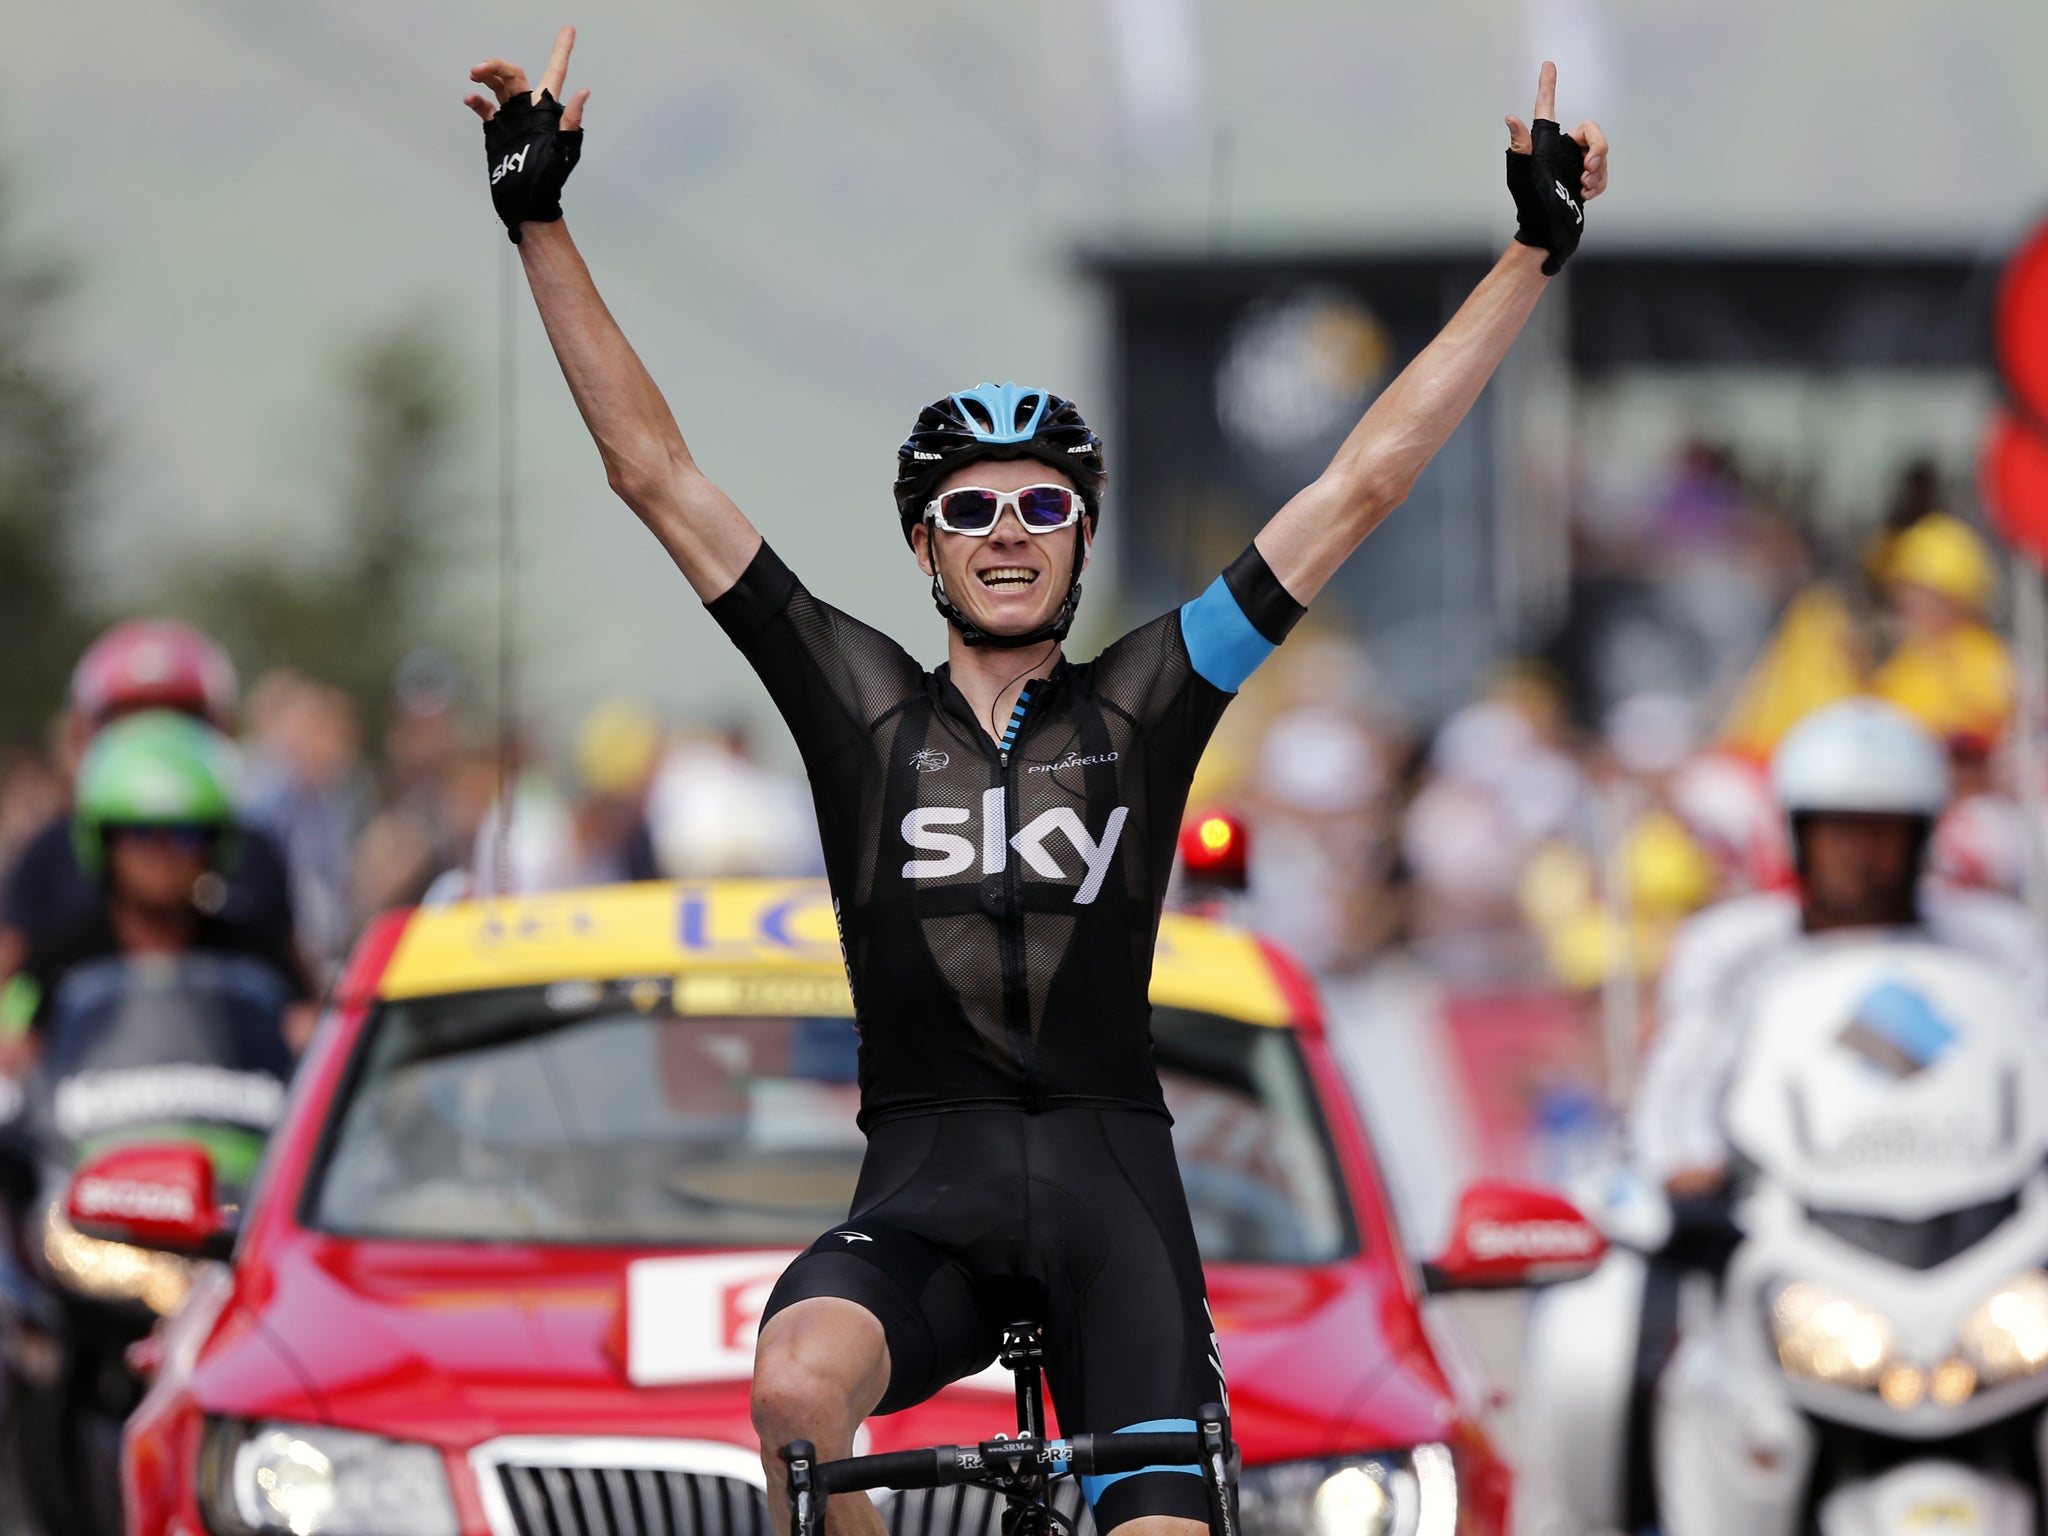 Chris Froome celebrates victory on Stage 8 of the Tour de France